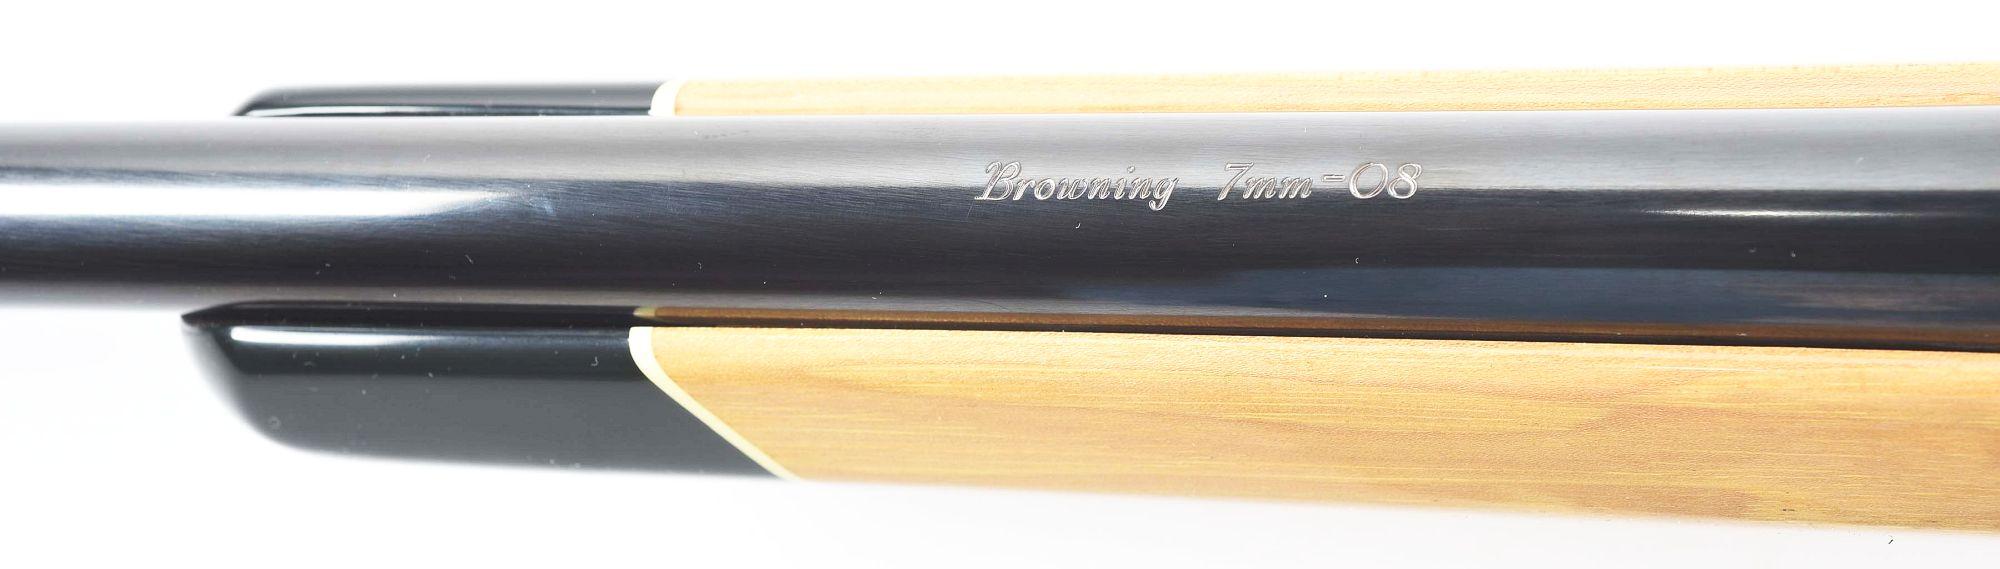 (M) HICKORY STOCKED BROWNING BBR BOLT ACTION RIFLE